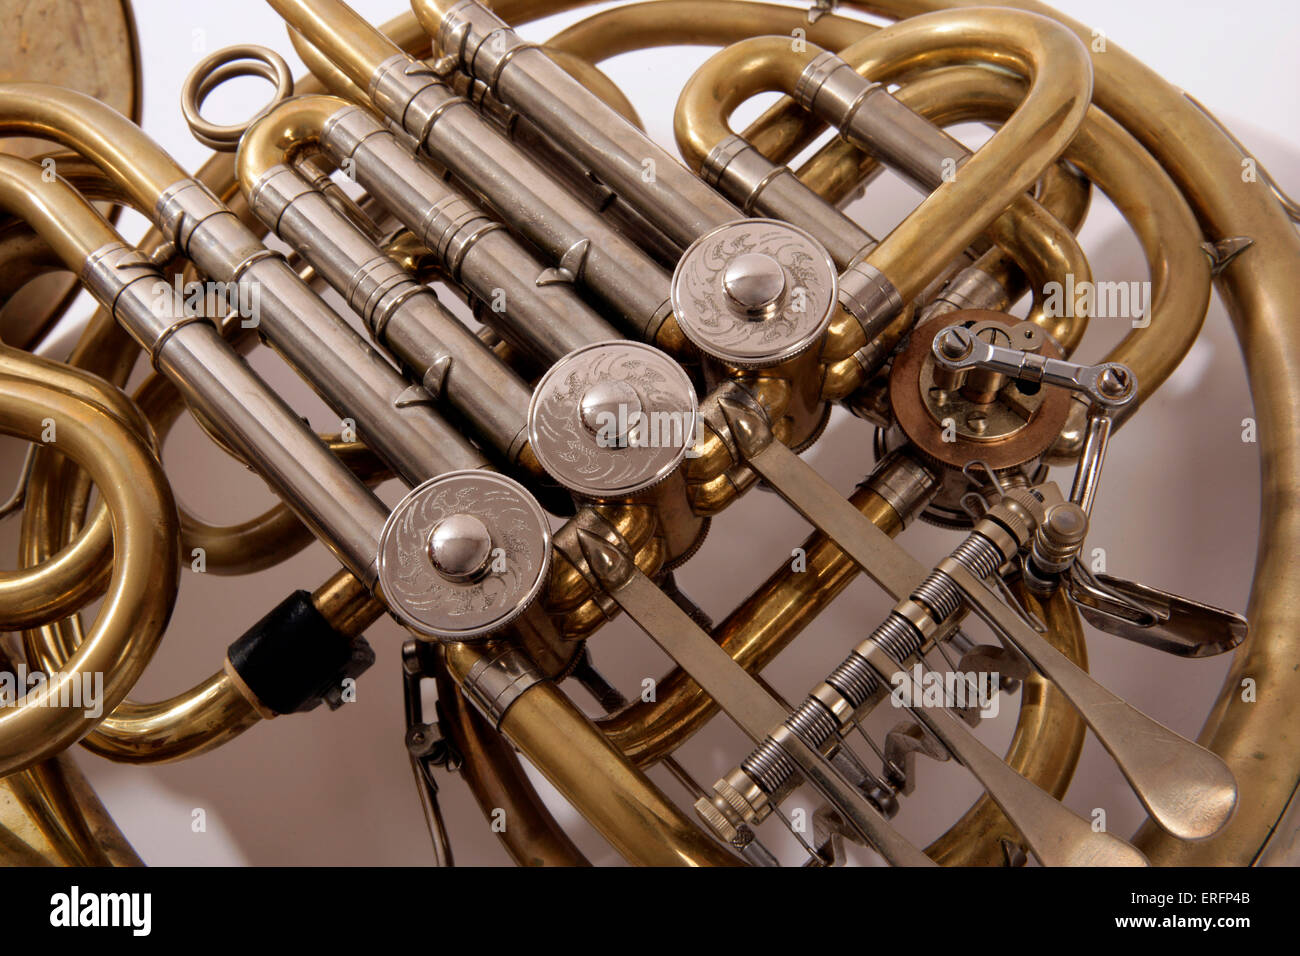 French Horn made by Alexander, (unlacquered instrument), with Rotary valves, and B flat valve Stock Photo